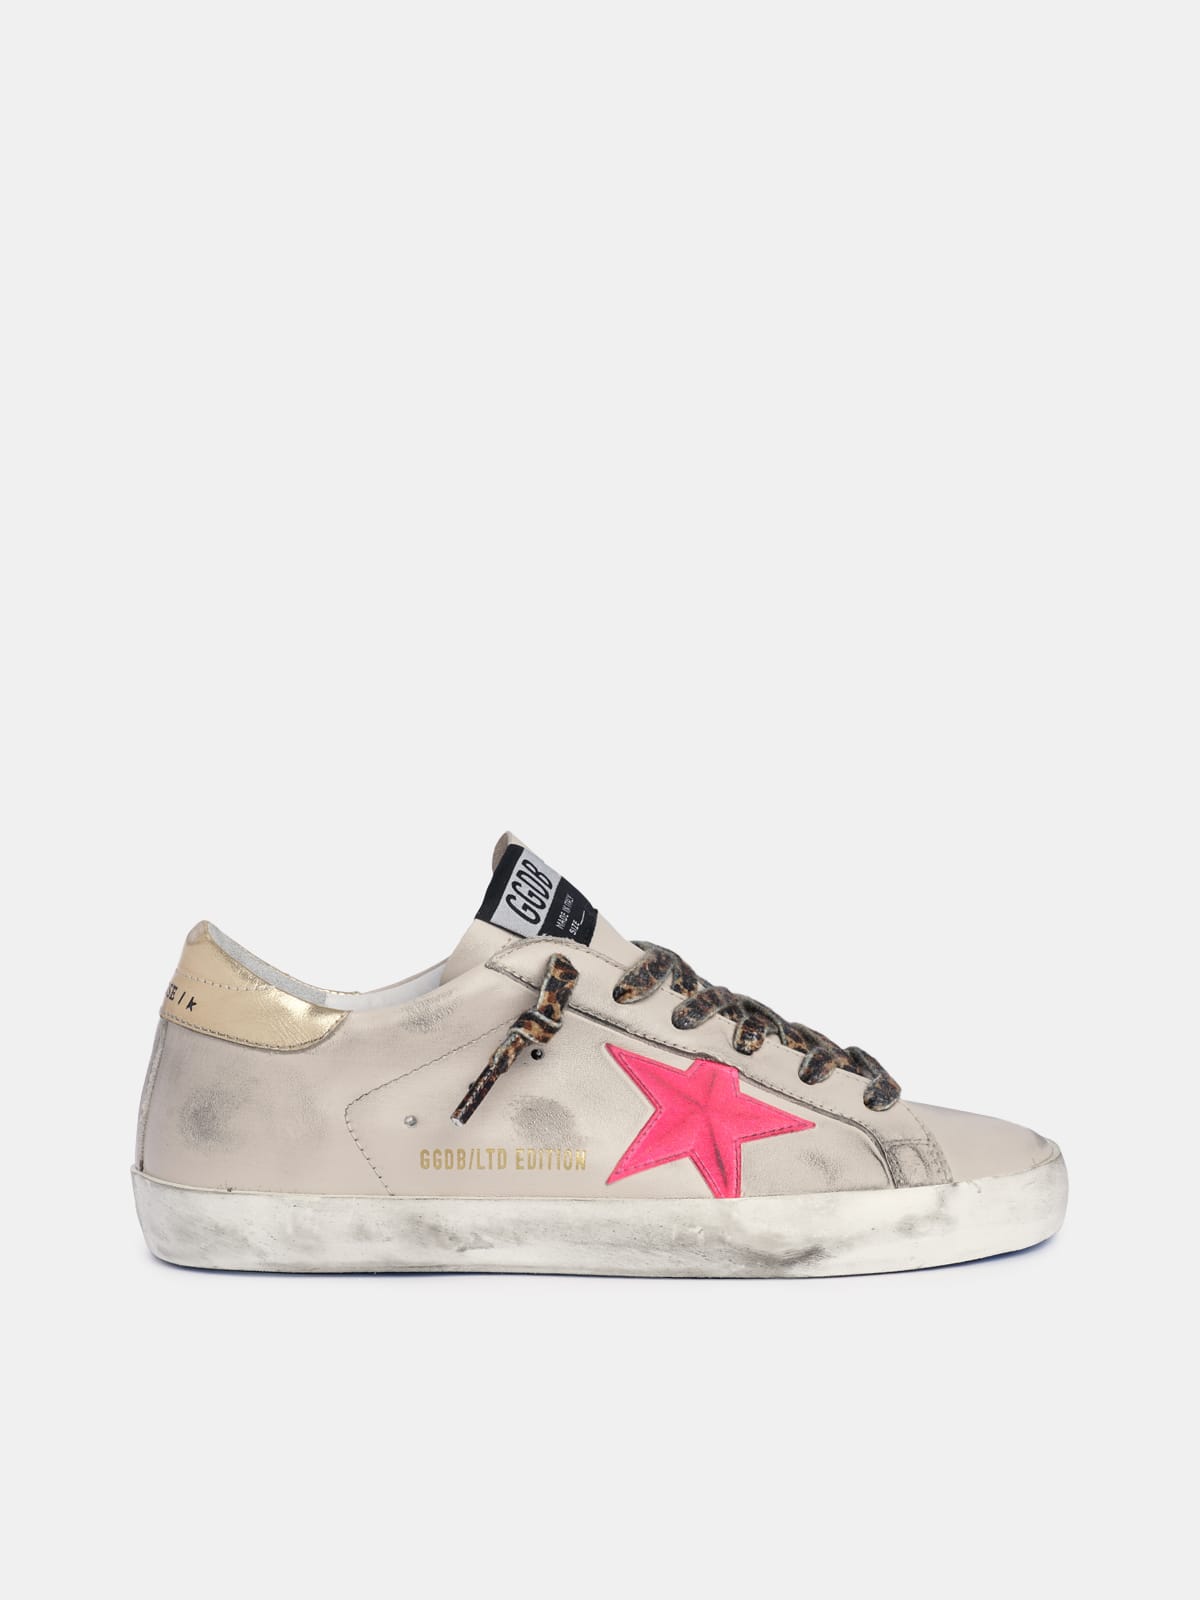 Golden Goose - Super-Star sneakers in beige leather with fuchsia star and gold heel tab in 